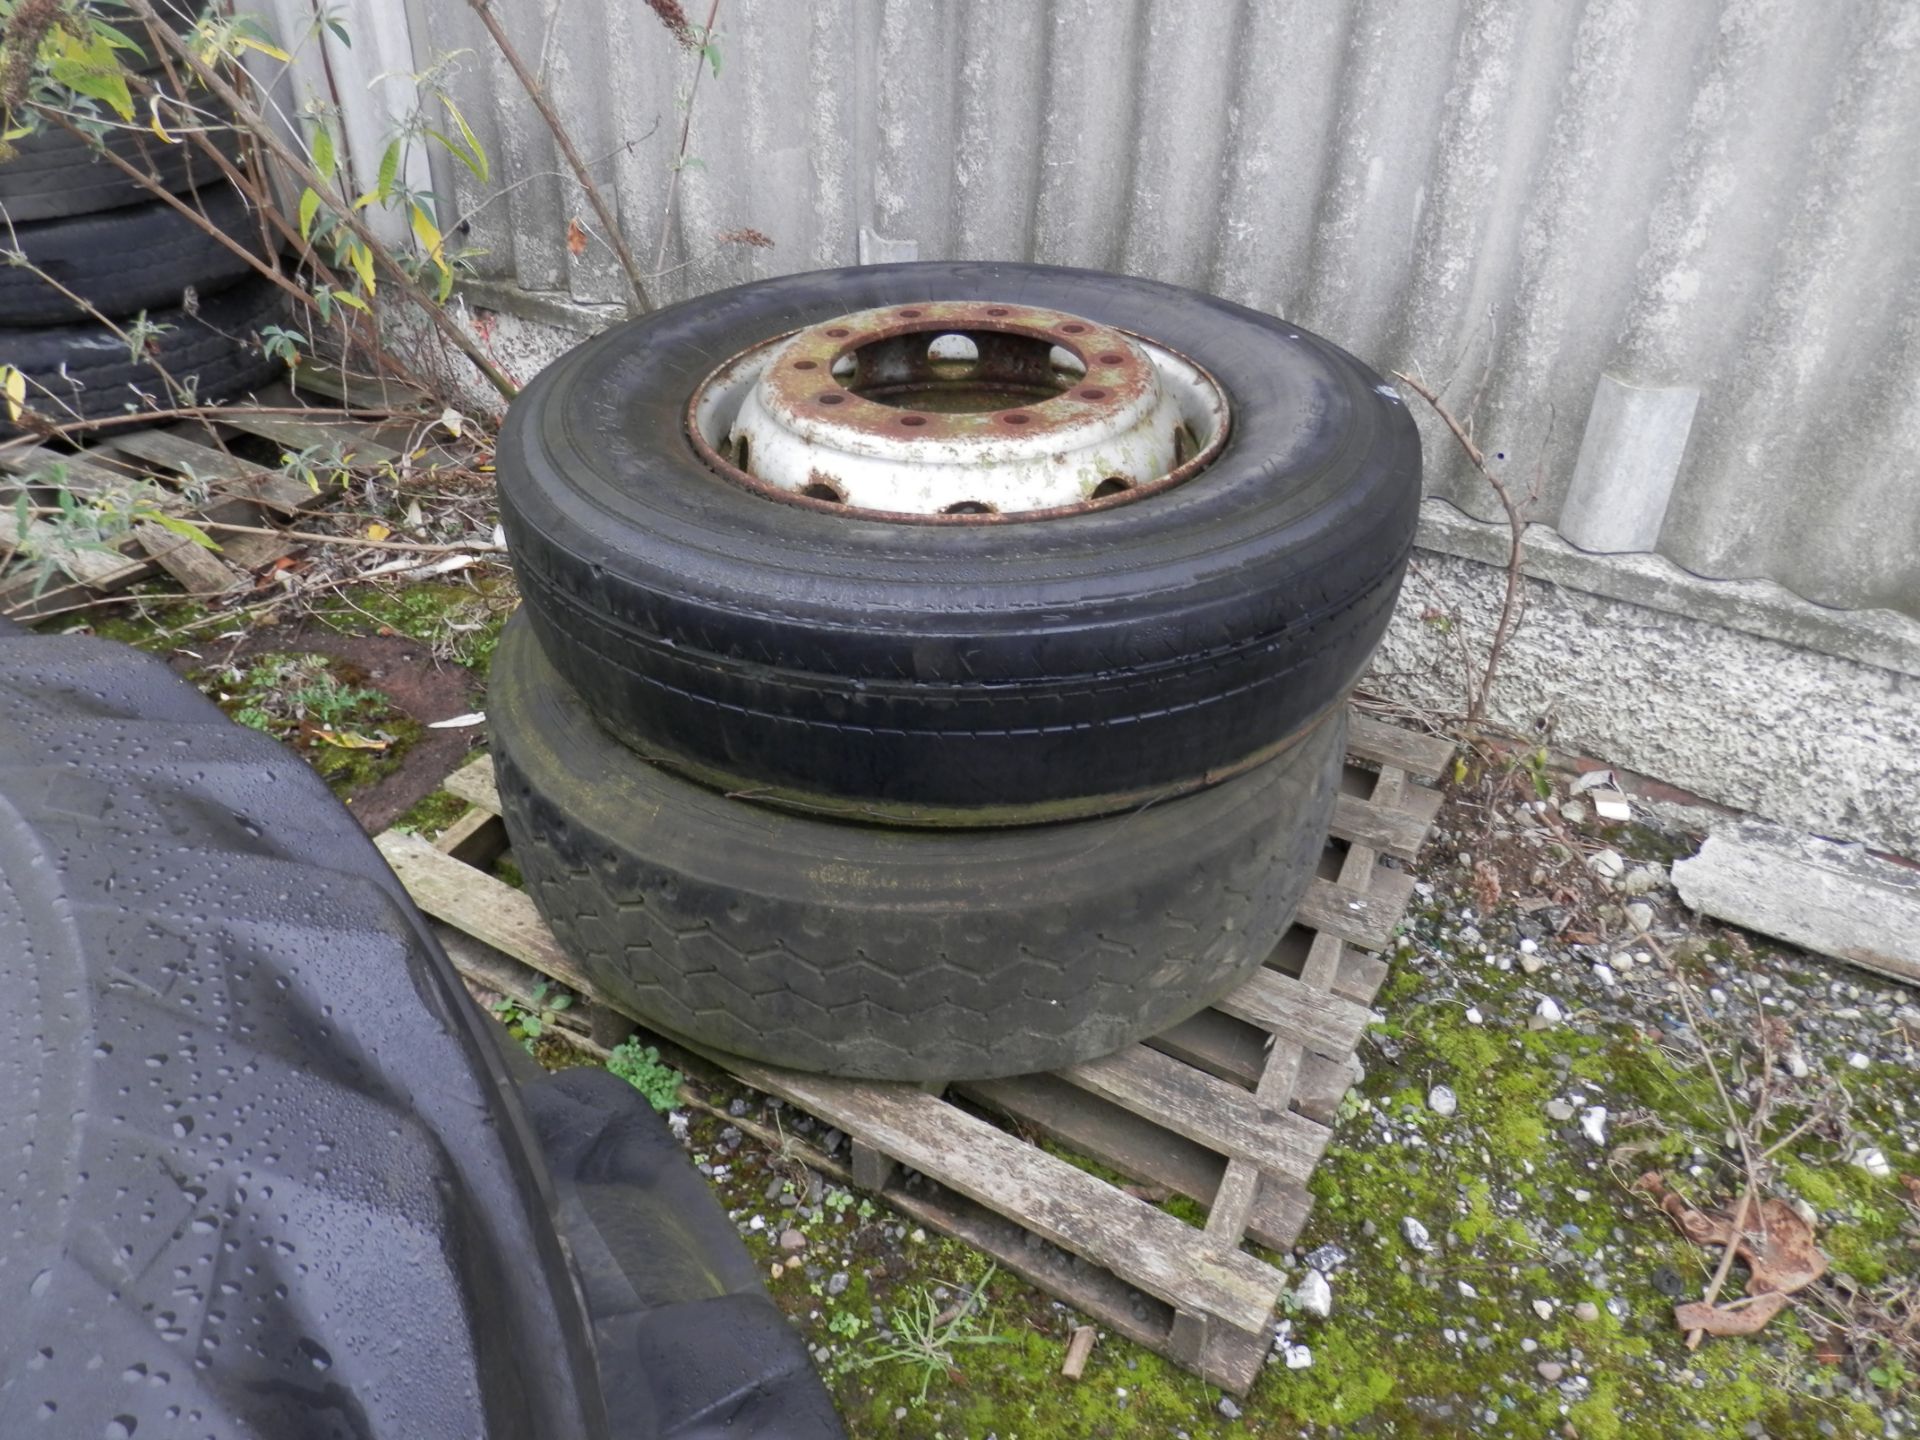 85 + ASSORTED LORRY, CAR & TRAILER TYRES & WHEELS, AS PICTURED. BUYER TO COLLECT COMPLETE JOBLOT. - Image 4 of 10